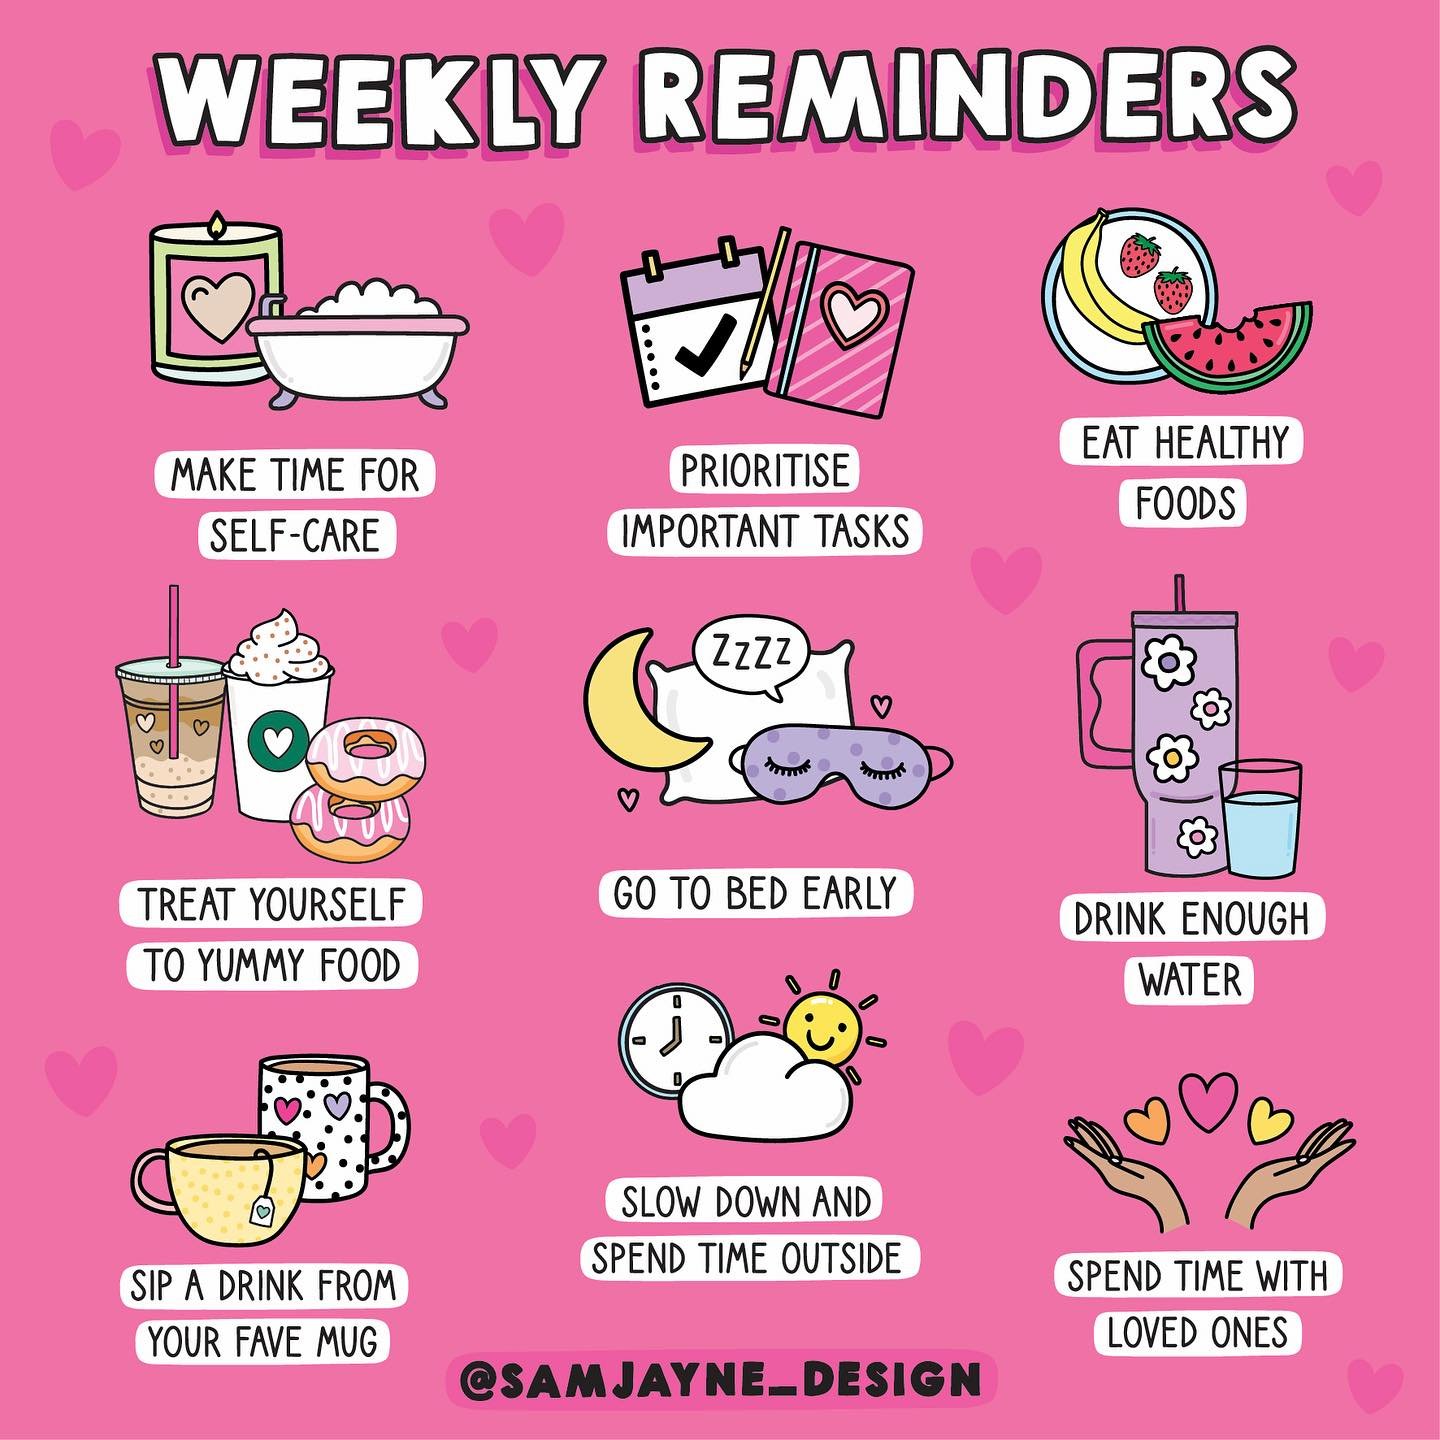 ⭐️ New week, new vibes ✨ Here&rsquo;s my weekly self-care reminders to kickstart the week right: 💖 Prioritise me time, plan for the week ahead and practice daily gratitude 🙌🏼 And&hellip;introducing my new weekly planner and the story behind it 👀
